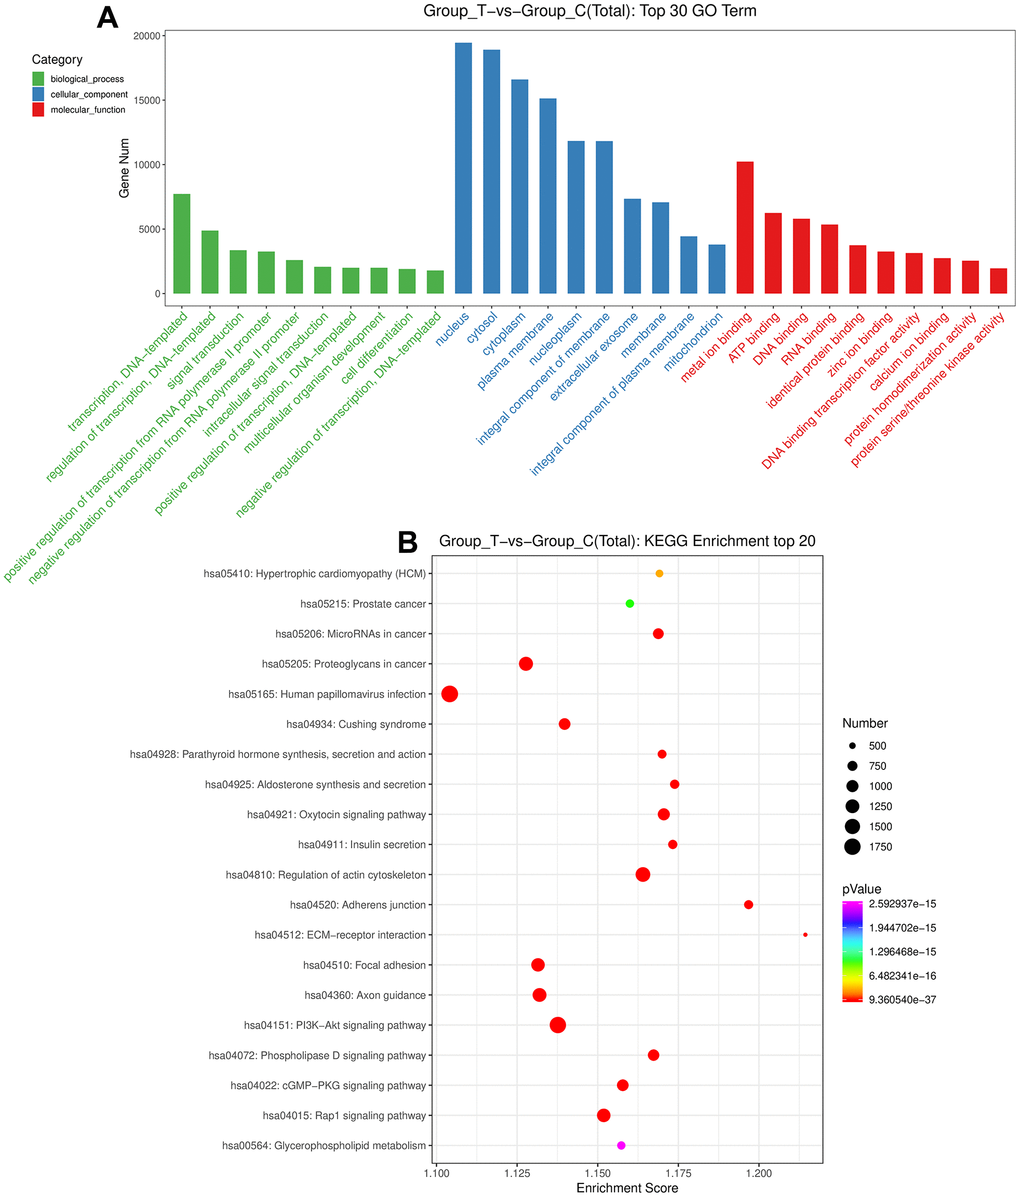 Functional analyses of the identified DE-miRNAs. (A) The top 30 Gene Ontology terms of these DE-miRNAs in biological process, cellular component and molecular function. (B) The top 20 Kyoto Encyclopedia of Genes and Genomes pathways enrichment of these DE-miRNAs.